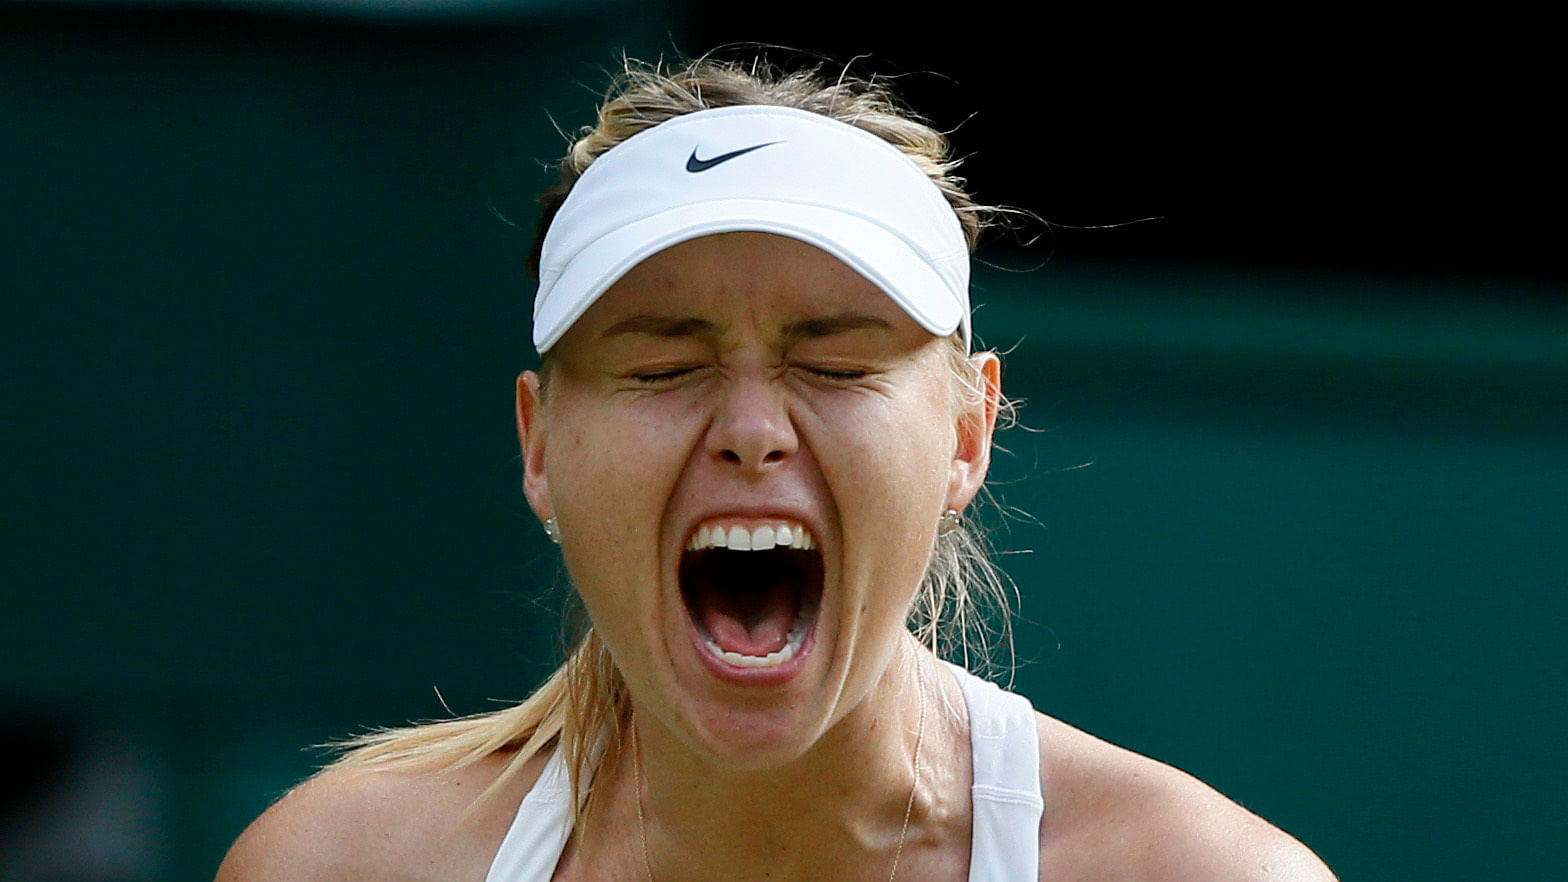 Sharapova ends her 15-month doping suspension in Stuttgart, Germany. (Photo: AP)